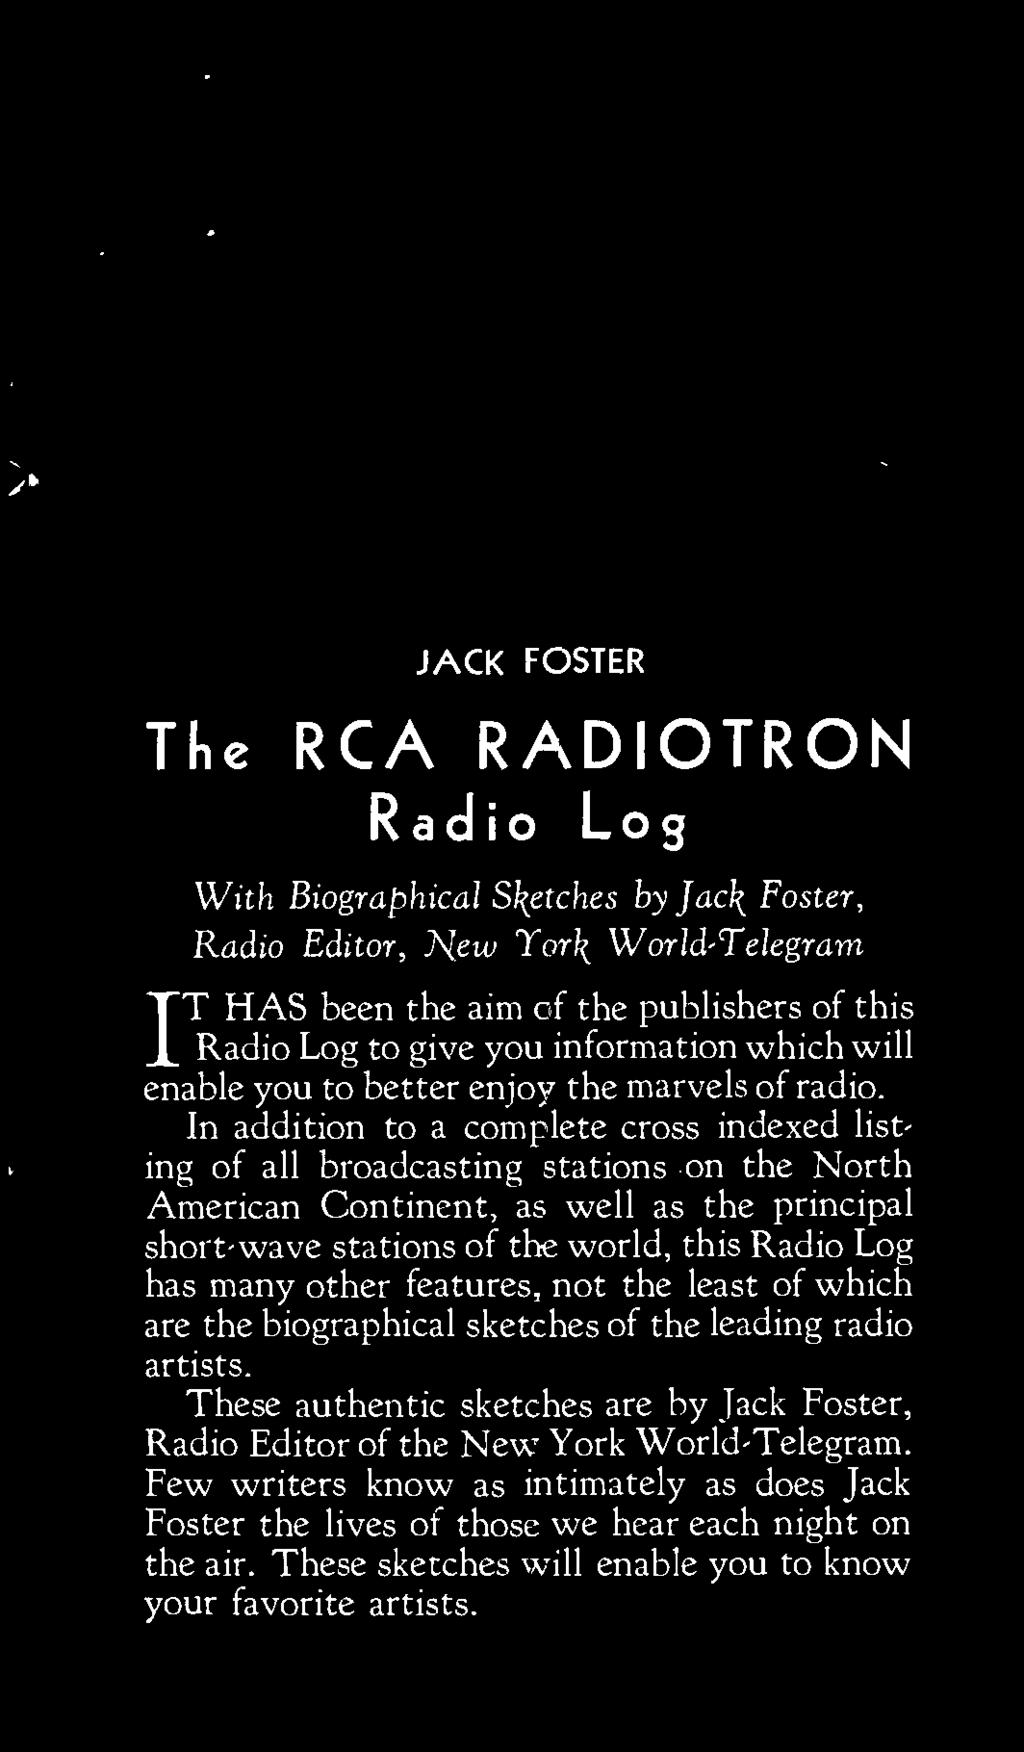 In addition to a complete cross indexed listing of all broadcasting stations on the North American Continent, as well as the principal short -wave stations of the world, this Radio Log has many other